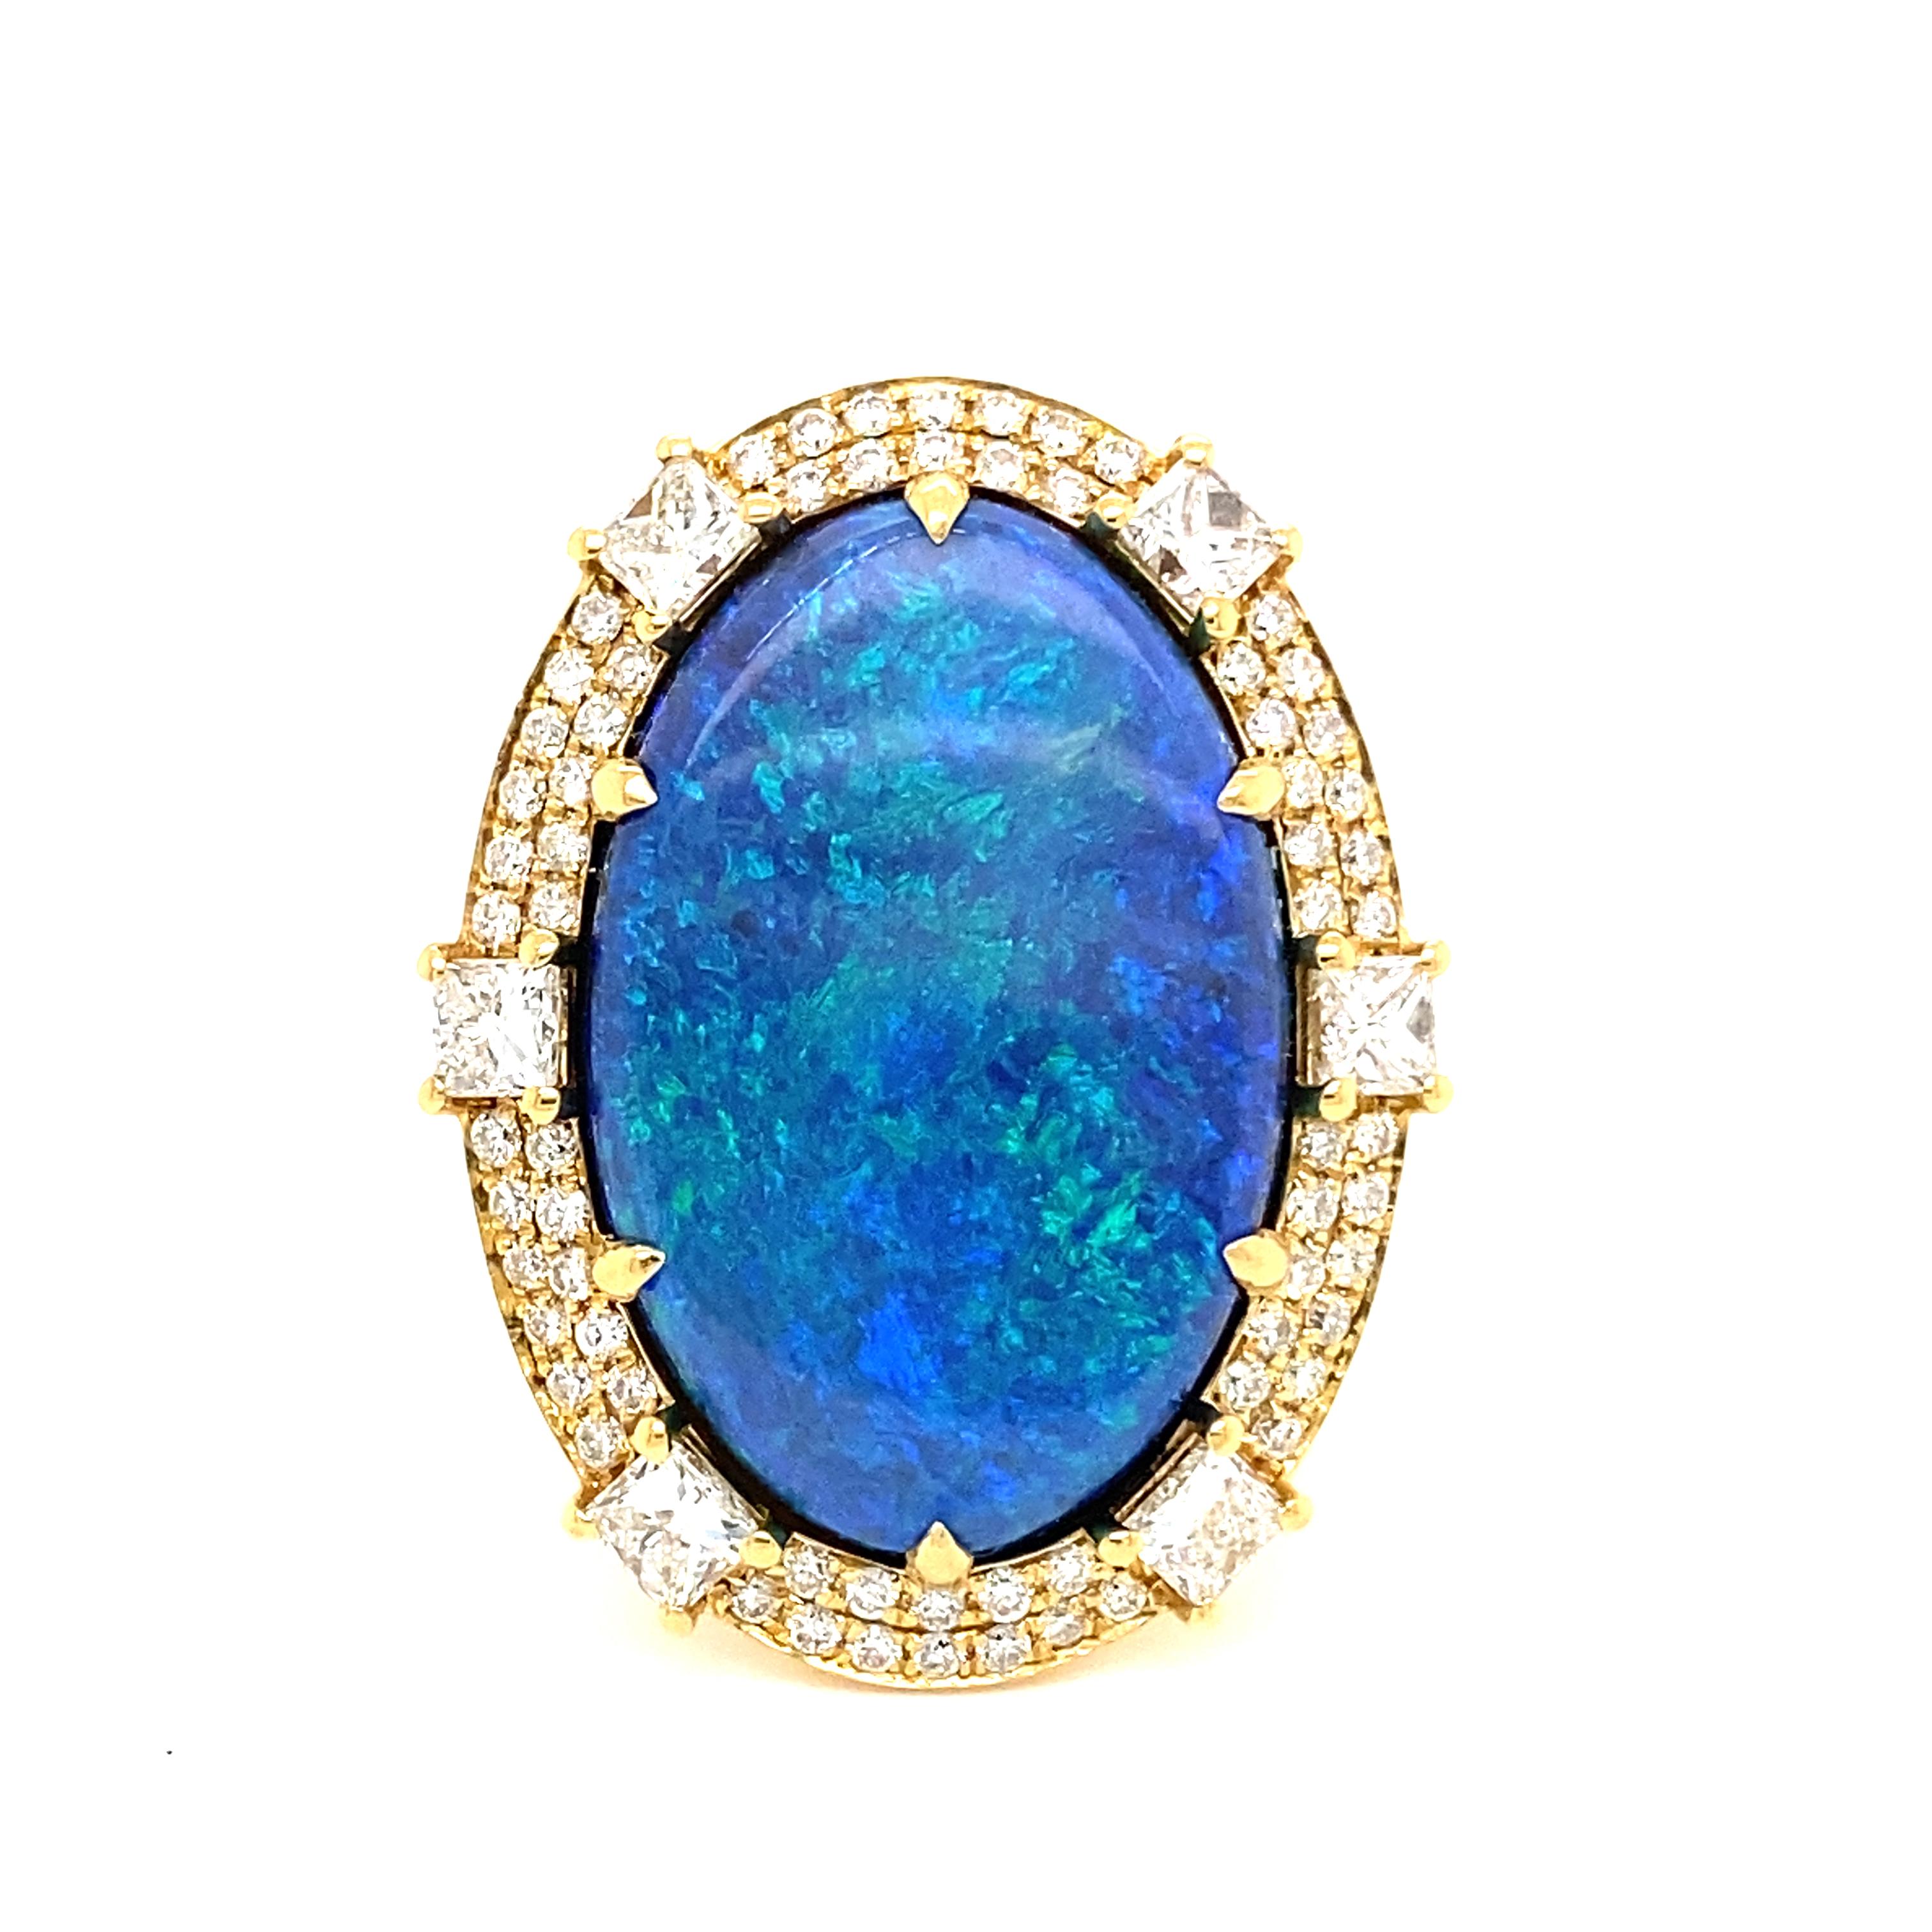 This stunning cocktail ring showcases a beautiful 10.98 Carat Oval Black Opal with a Diamond Halo on a Diamond Shank. This ring is set in 18k Yellow Gold, with 18k yellow gold prongs on the center stone.
Total Diamond Weight = 2.02 Carats. Ring Size